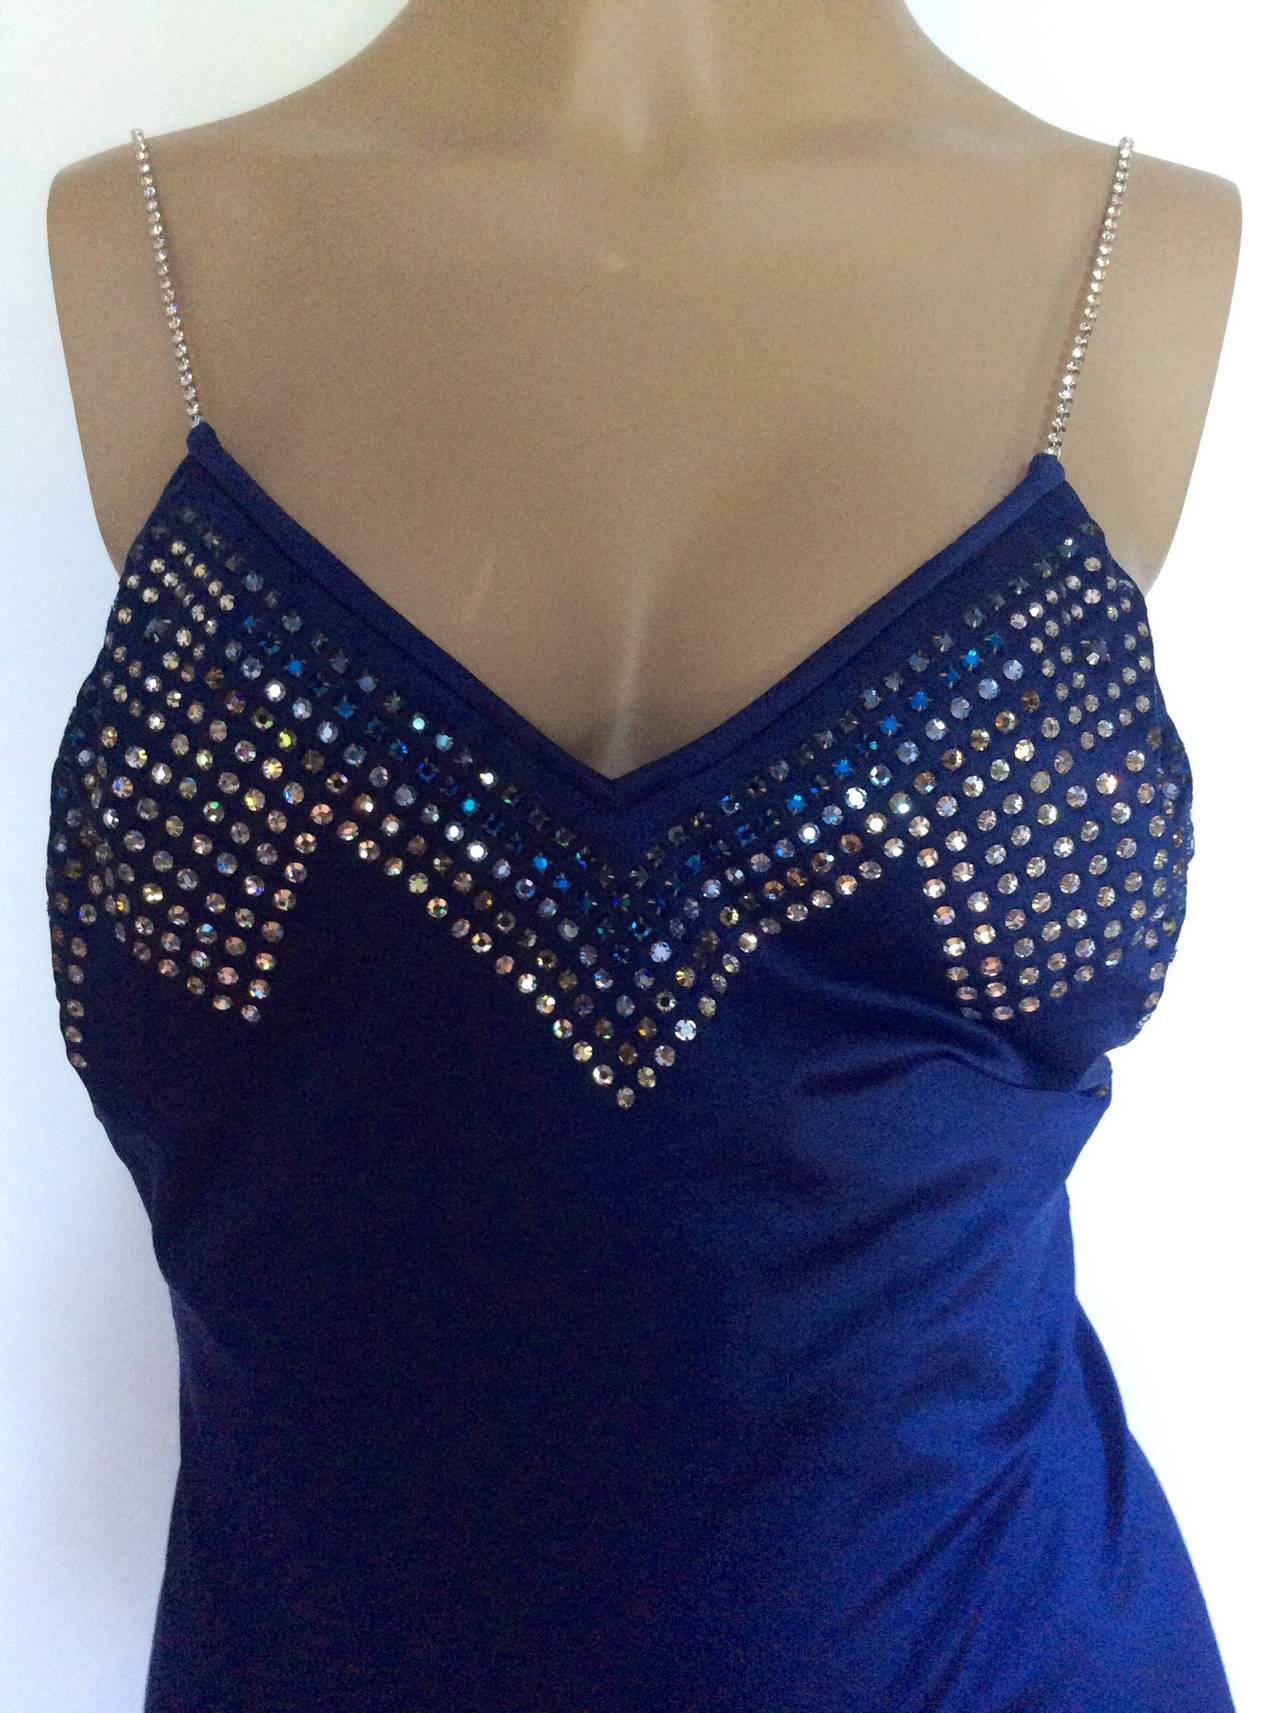 This is a rare Giorgio Di Sant'Angelo Navy Crystal Embellished One Piece Bathing Suit
Measurements:
Bust up to 34